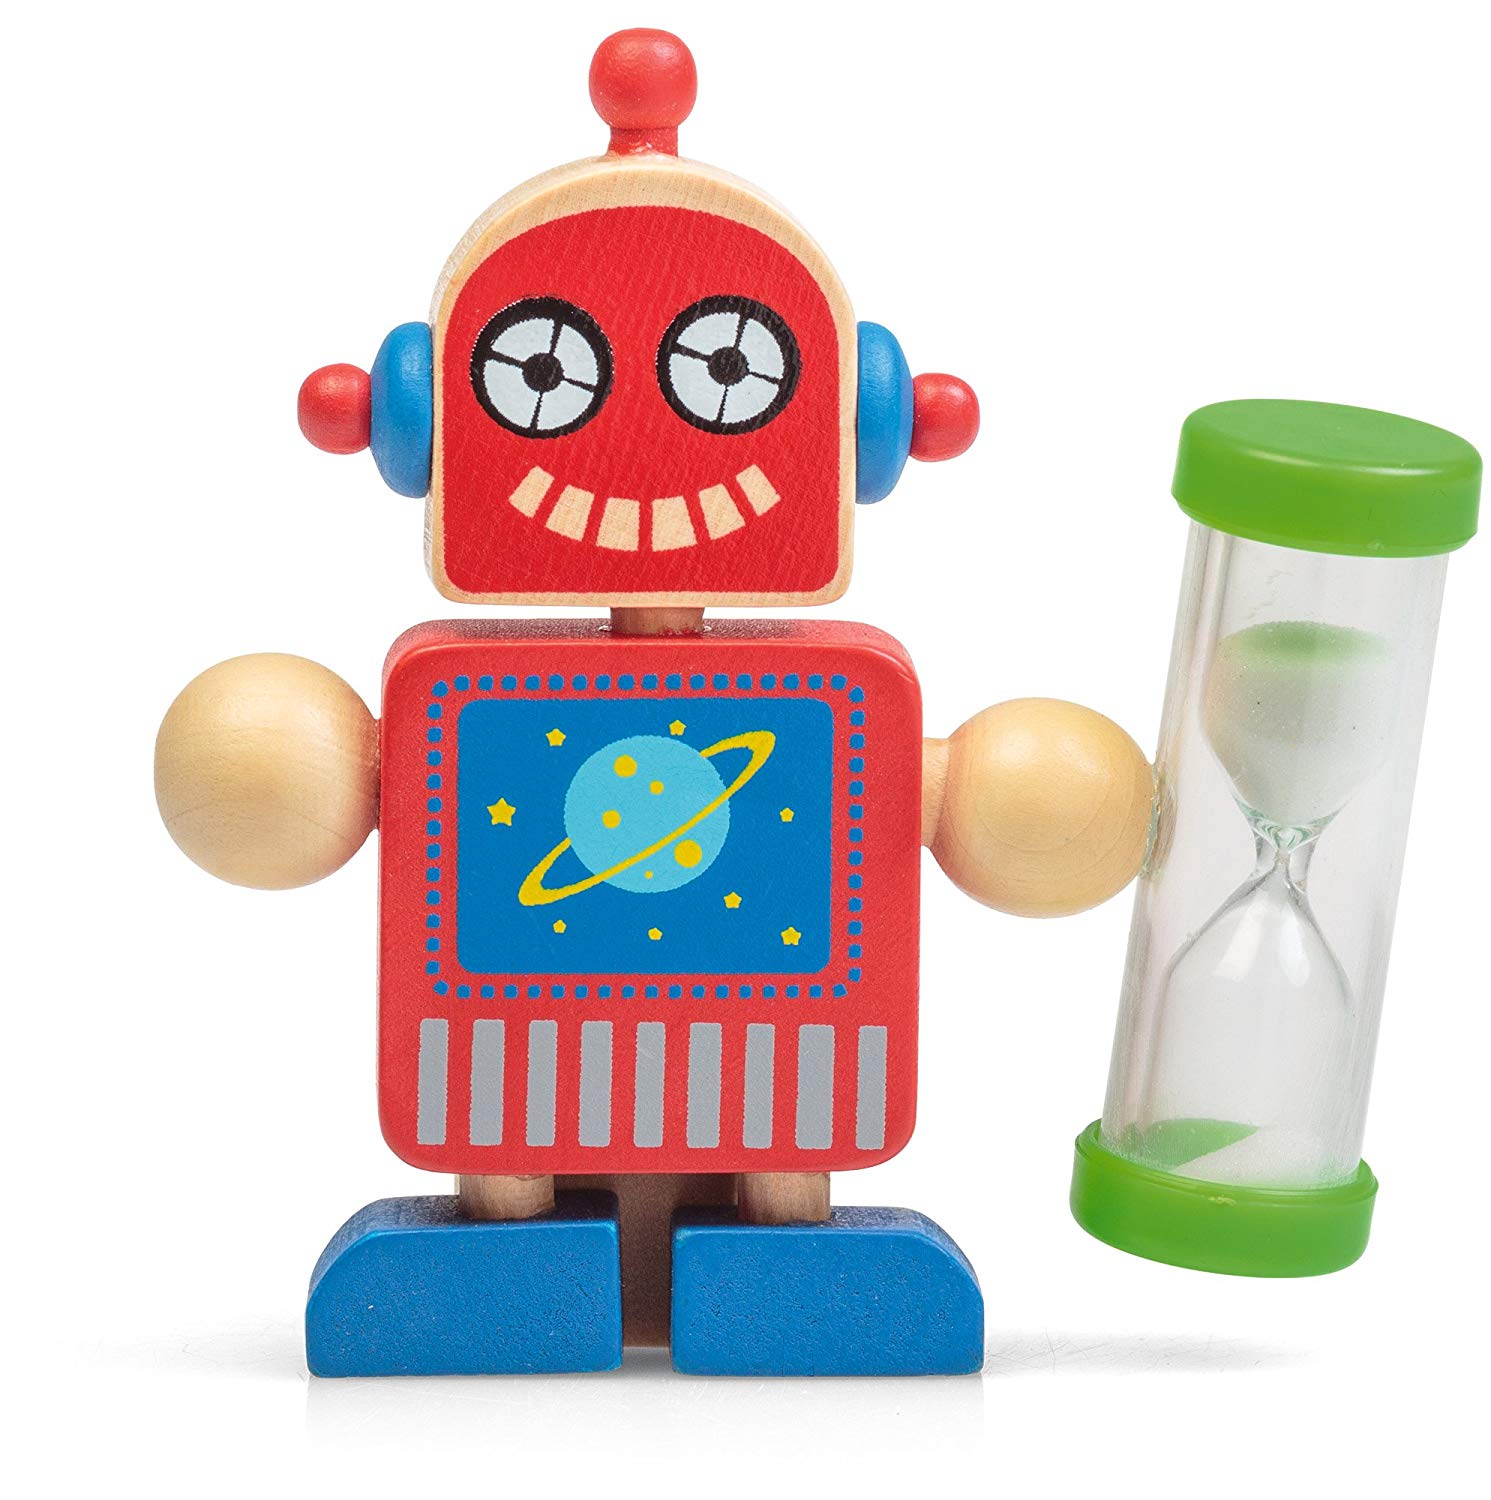 Robot Tooth Brush Timer, Robots sure are helping us more and more these days, they can even advise how long you should clean your teeth for! Just flip over the Robot Tooth Brush Timer in this robot's hand and start scrubbing away at your gnashers. The Robot Tooth Brush Timer is a fantastic 3 minute sand timer which will encourage children to wait out the 3 minute time. When the final grain of sand tumbles through the hourglass it's time to rinse and spit, then place your toothbrush back in the robot's backp